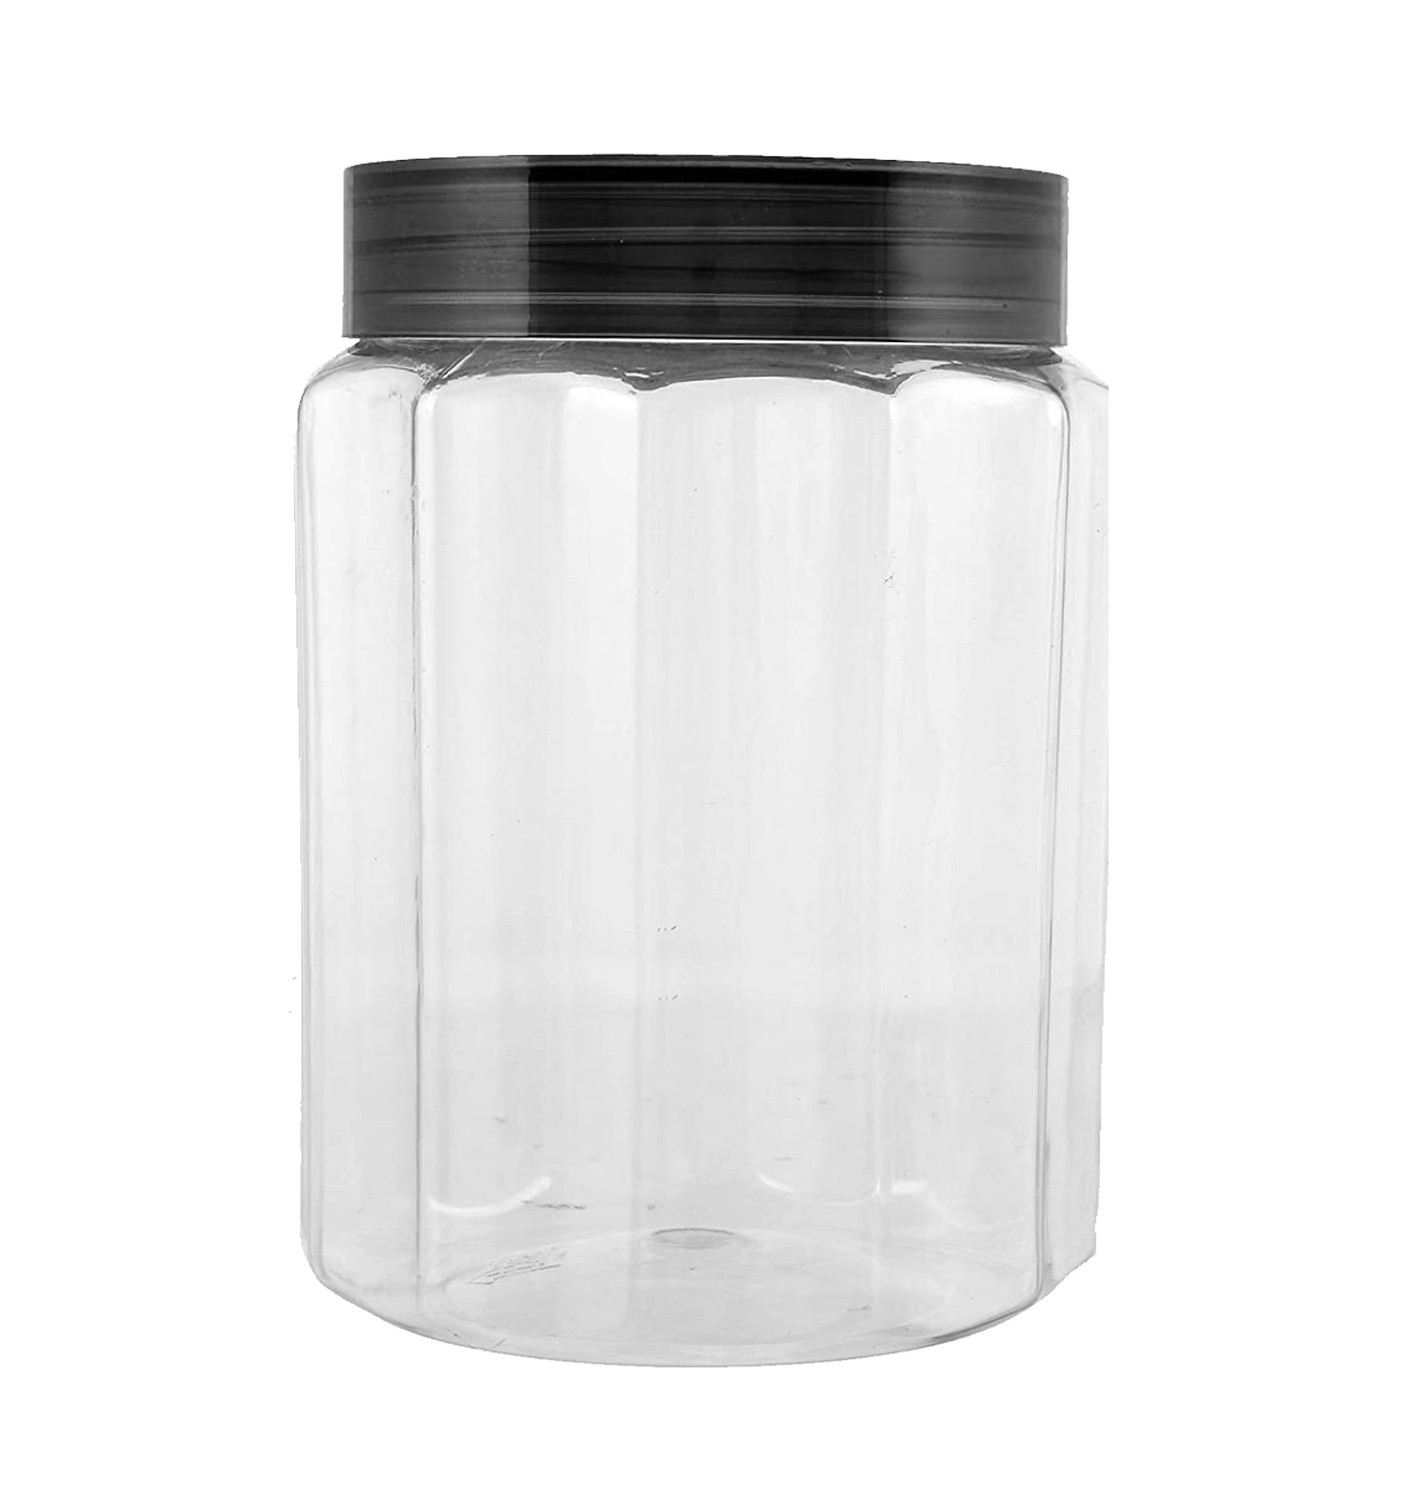 Kuber Industries Multipurpose Transparent Plastic Container With Airtight Lid,1100ml,(Grey)-HS42KUBMART25057